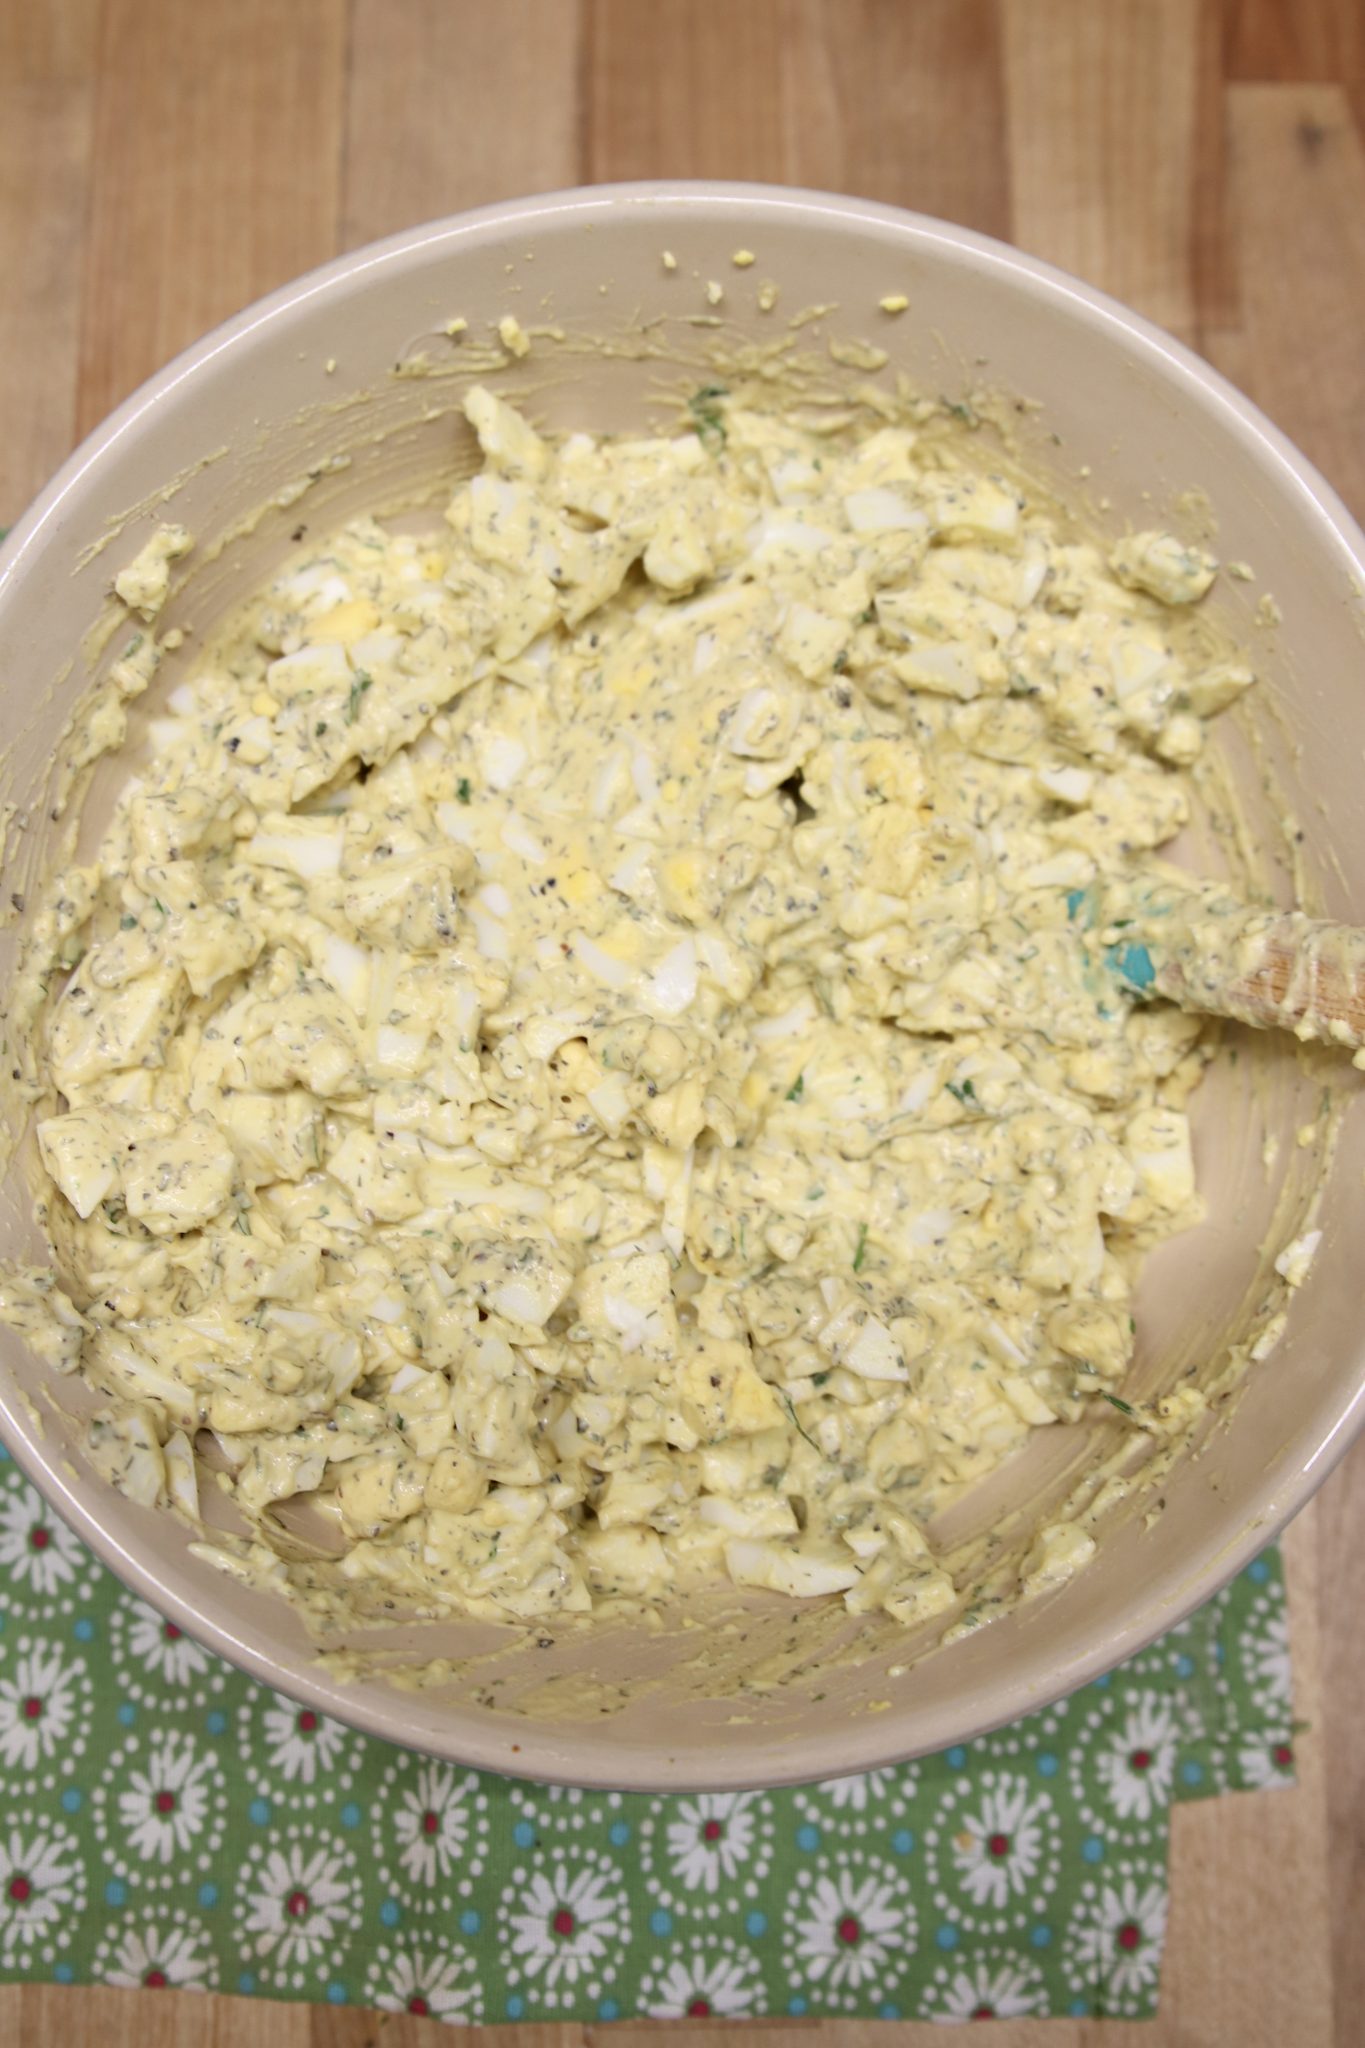 Chopped egg salad in a bowl